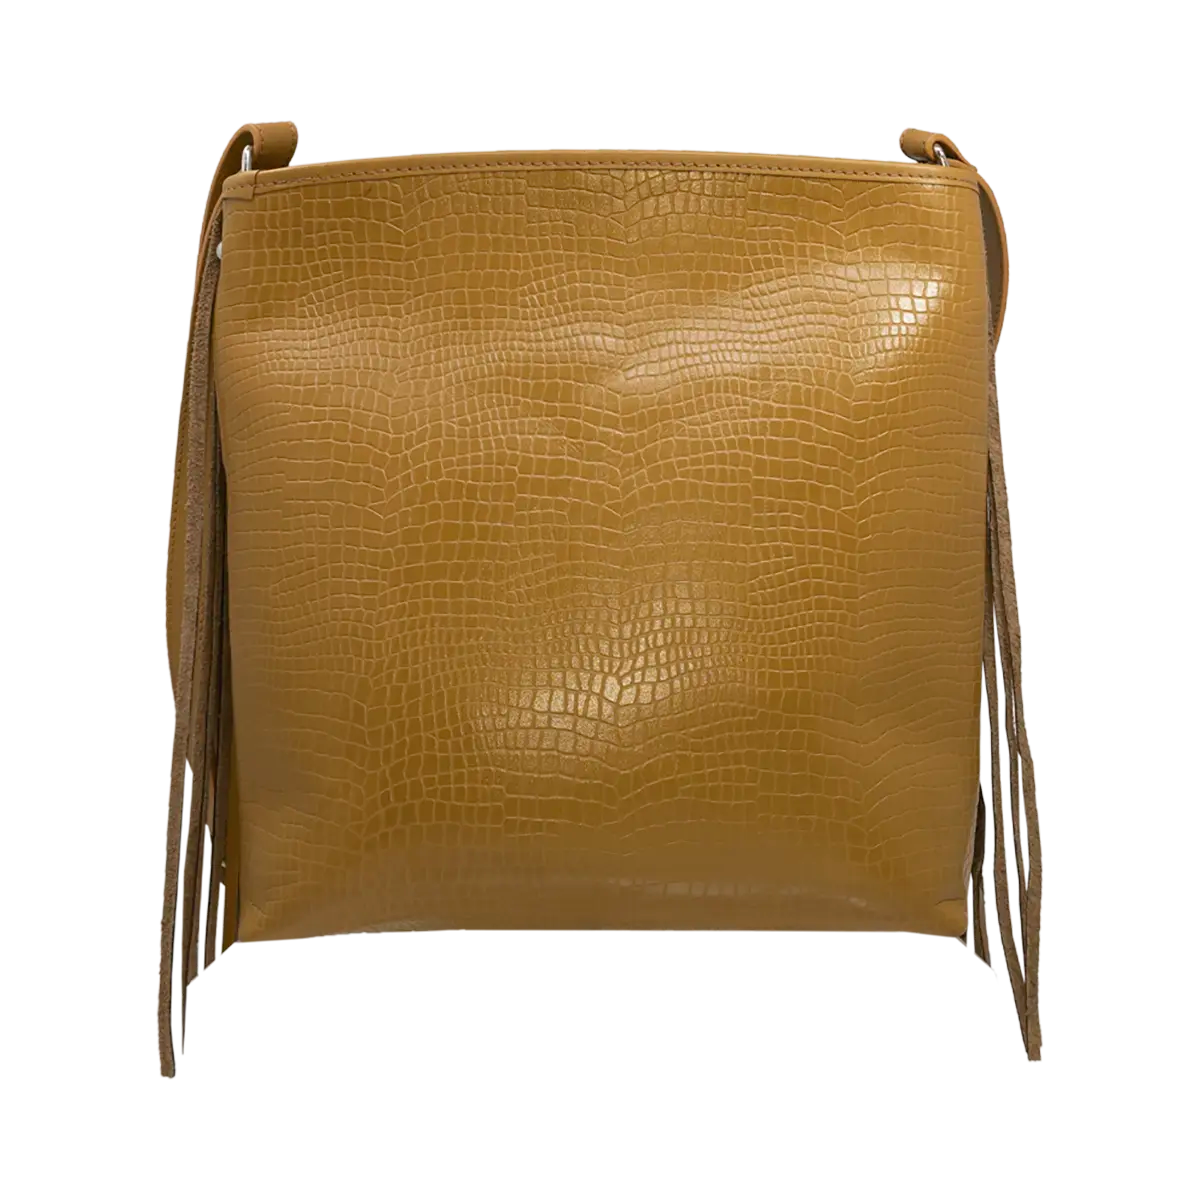 large tan leather crossbody bag with fringe. Fashion accessory for women in San Diego, CA.